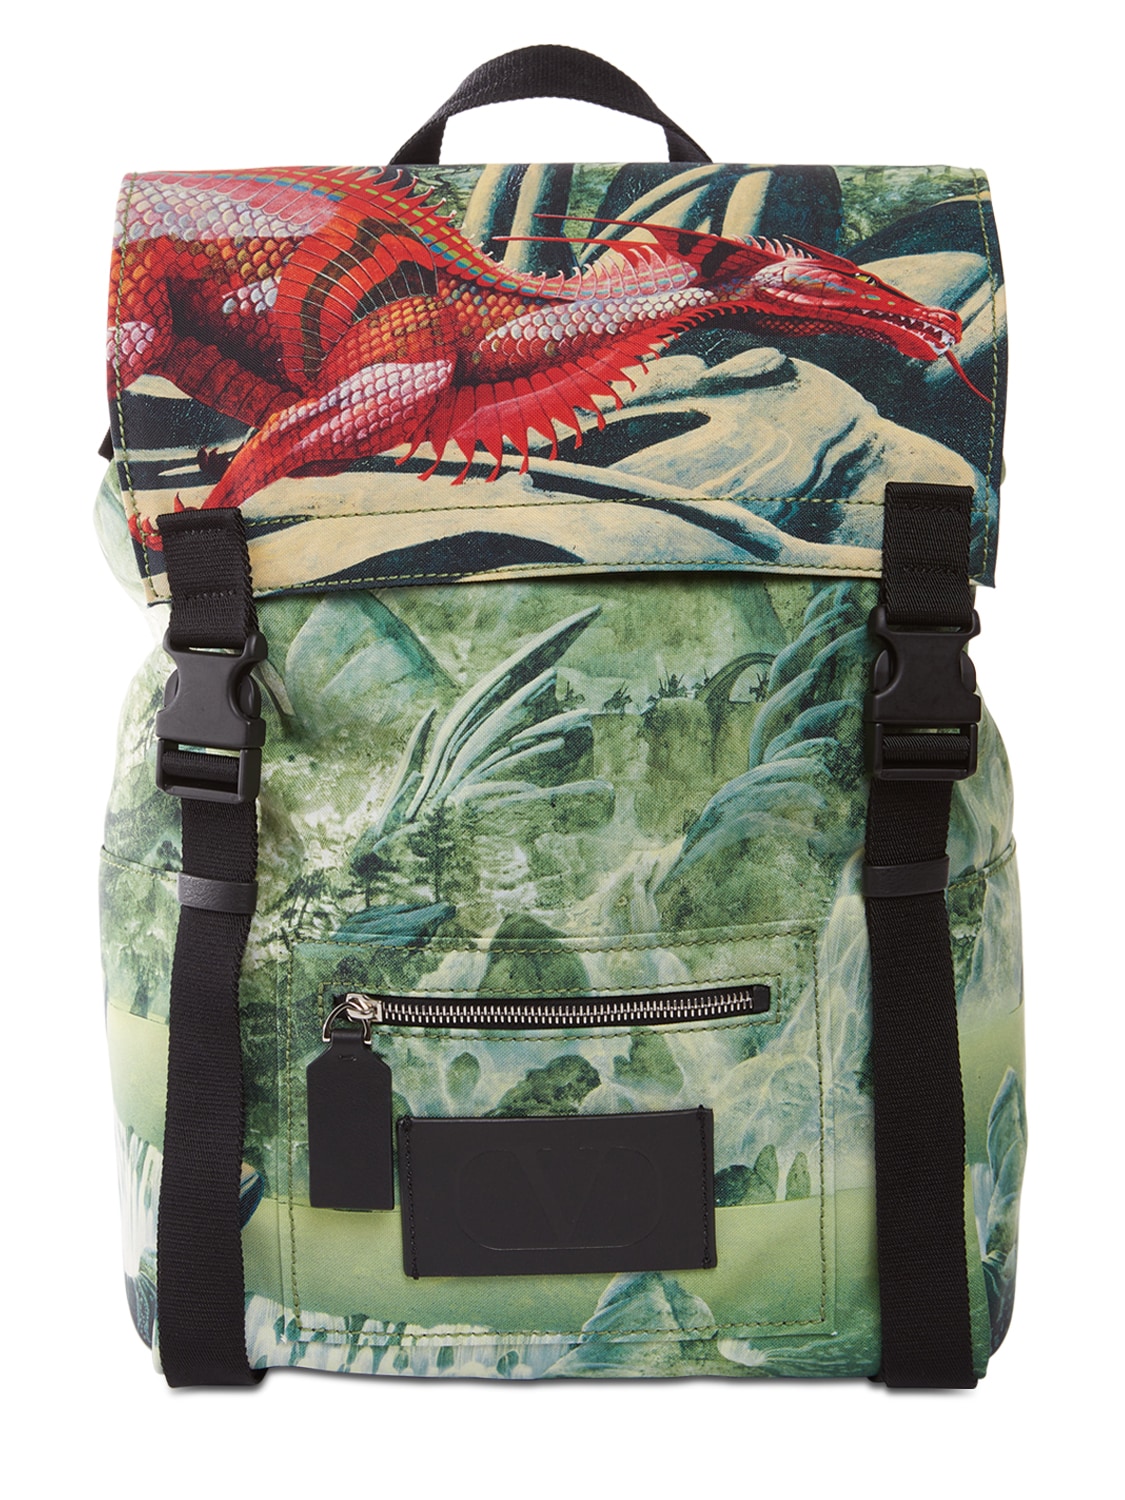 Valentino Garavani Outlet: backpack in nylon with printed logo - Green